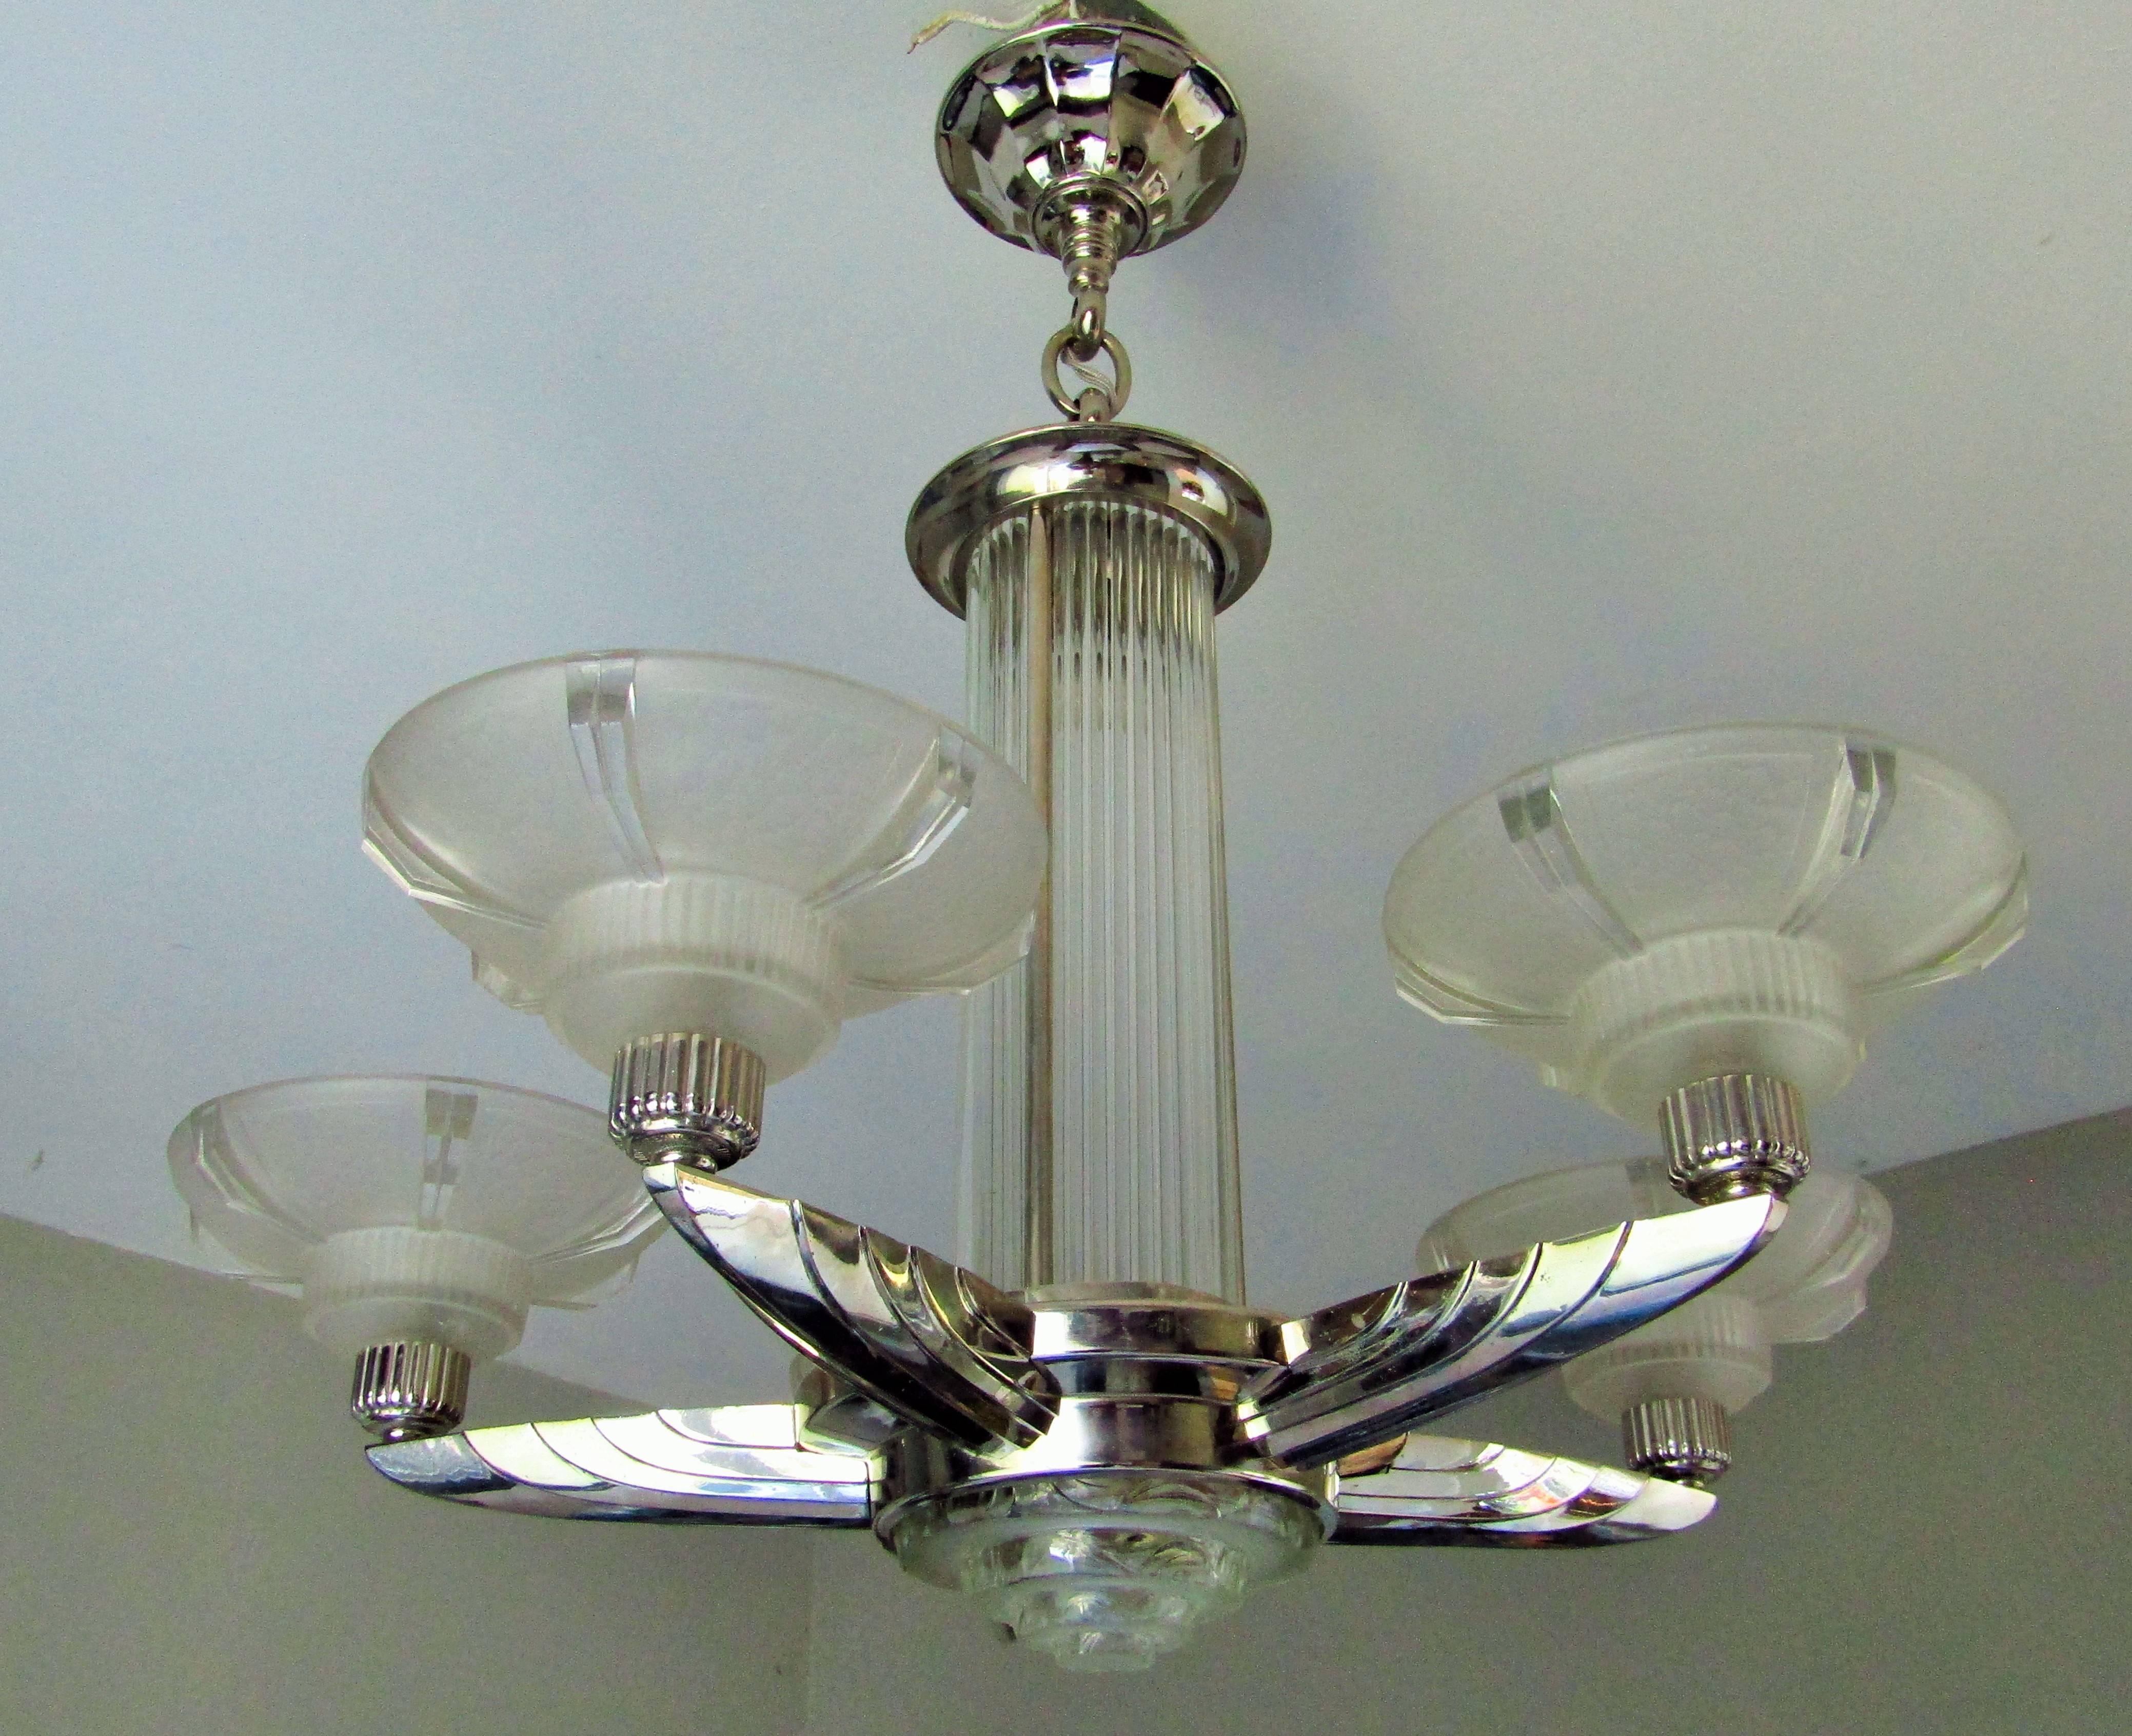 French Art Deco Chandelier by Petitot, France, 1935, Signed